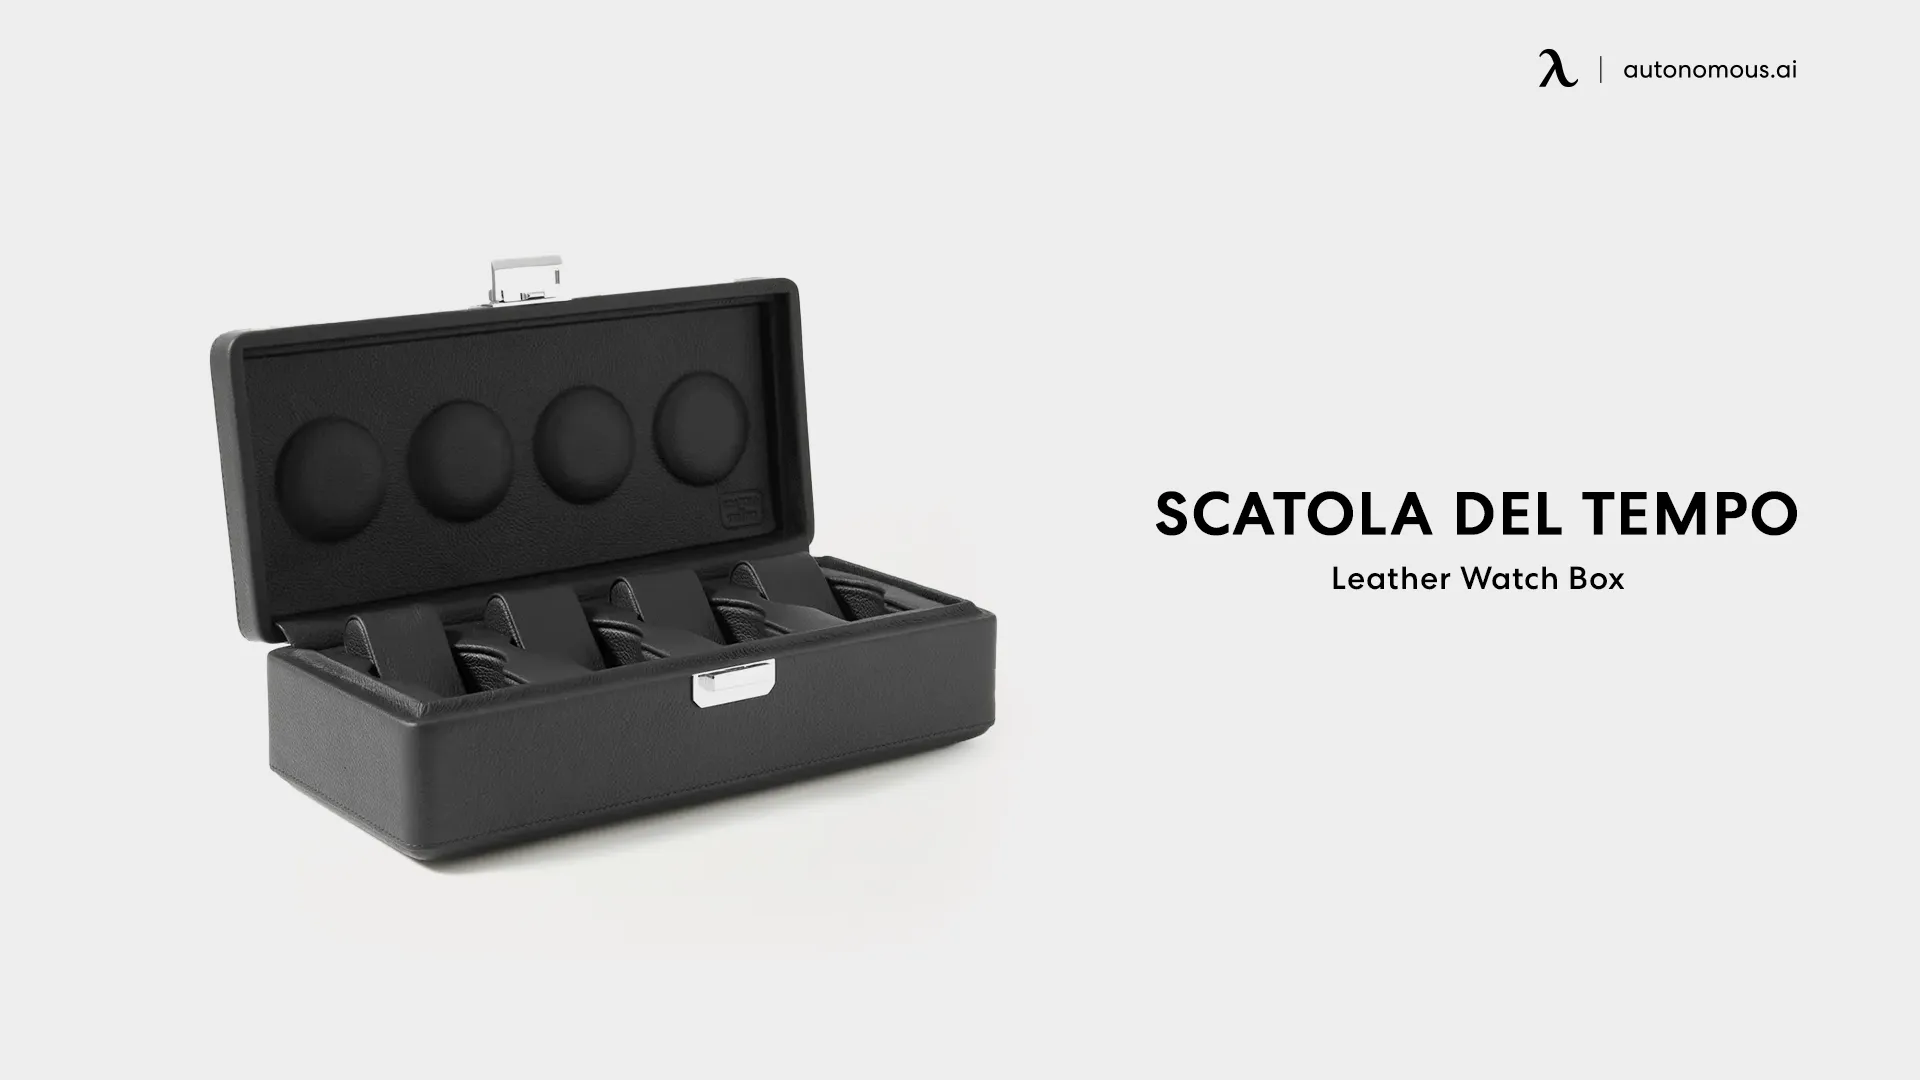 Leather watch box from Scatola Del Tempo